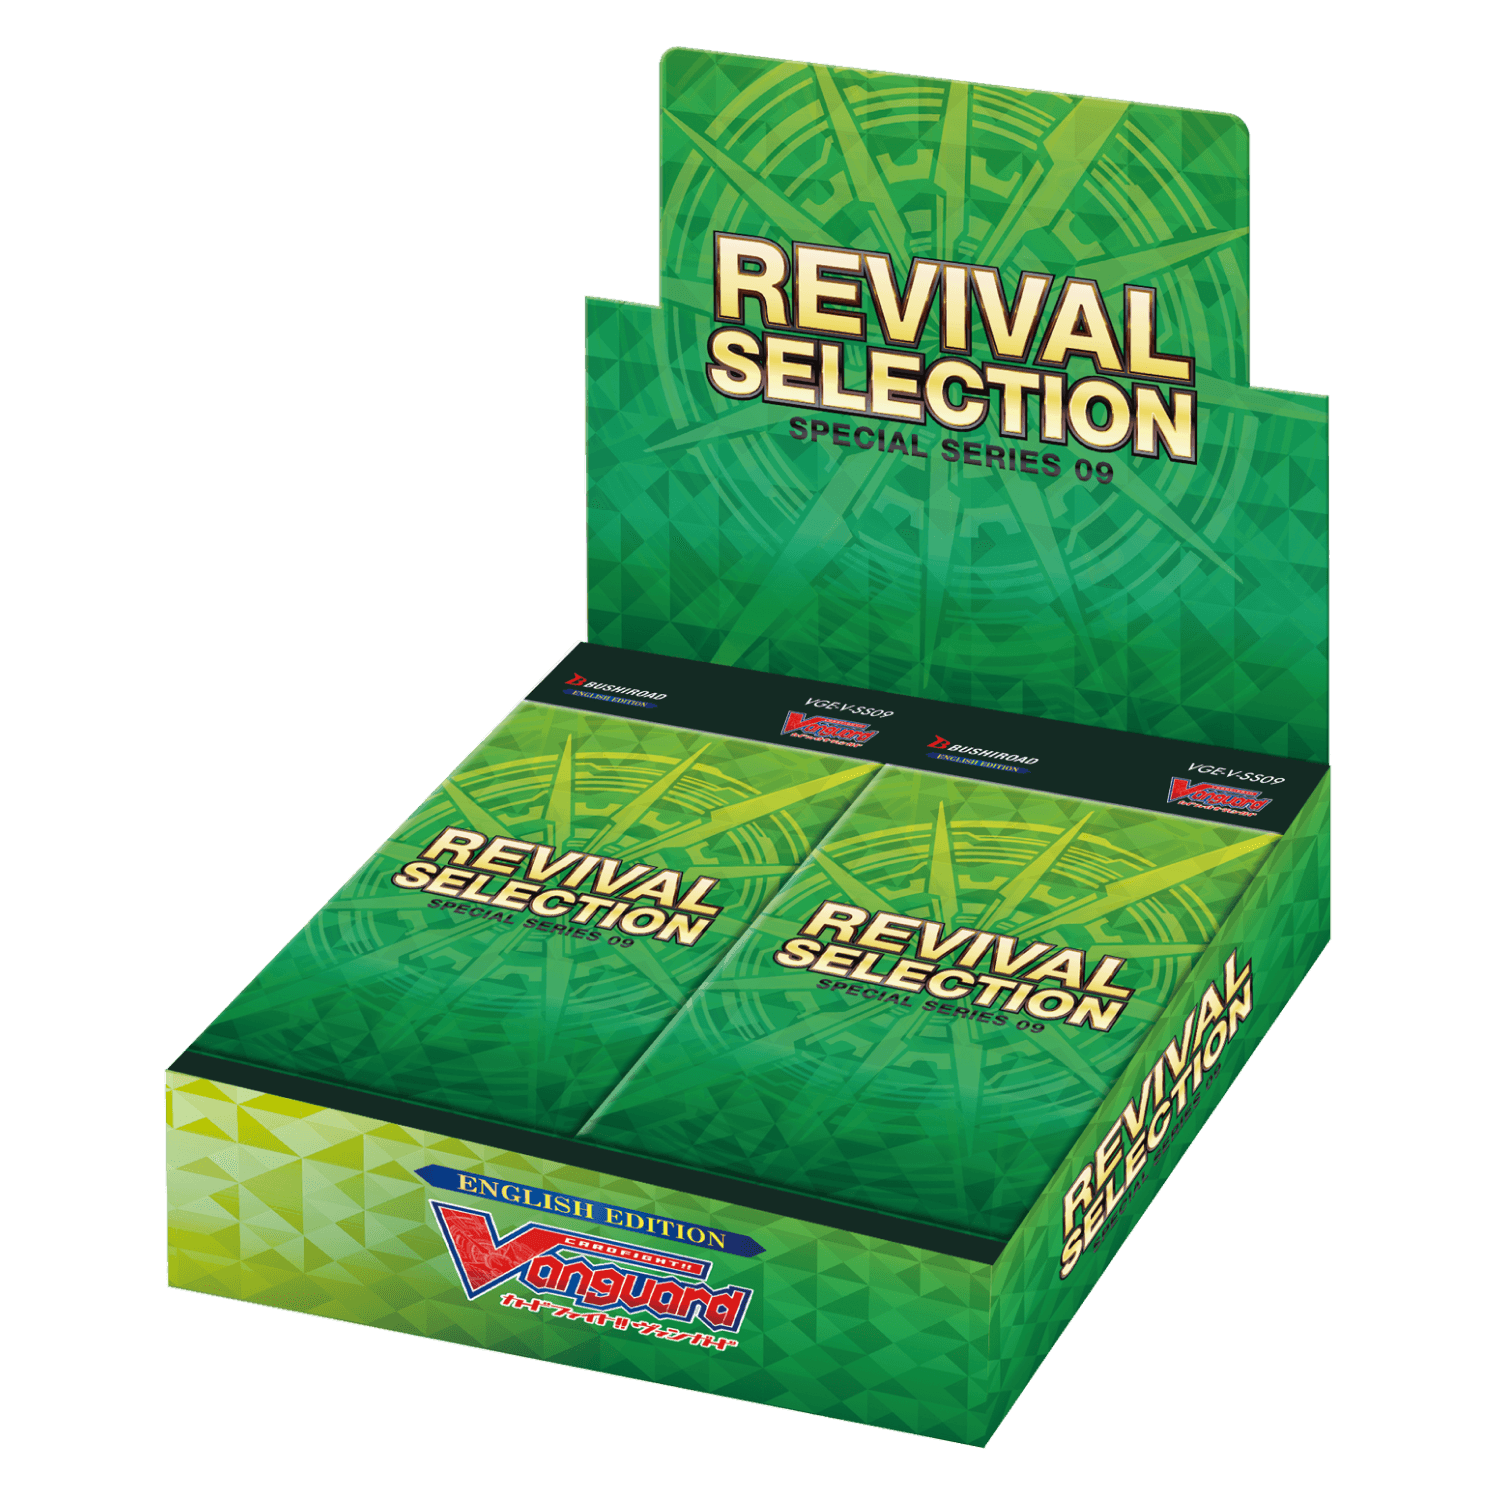 Cardfight!! Vanguard - Special Series 09 Revival Selection Booster Box - The Card Vault